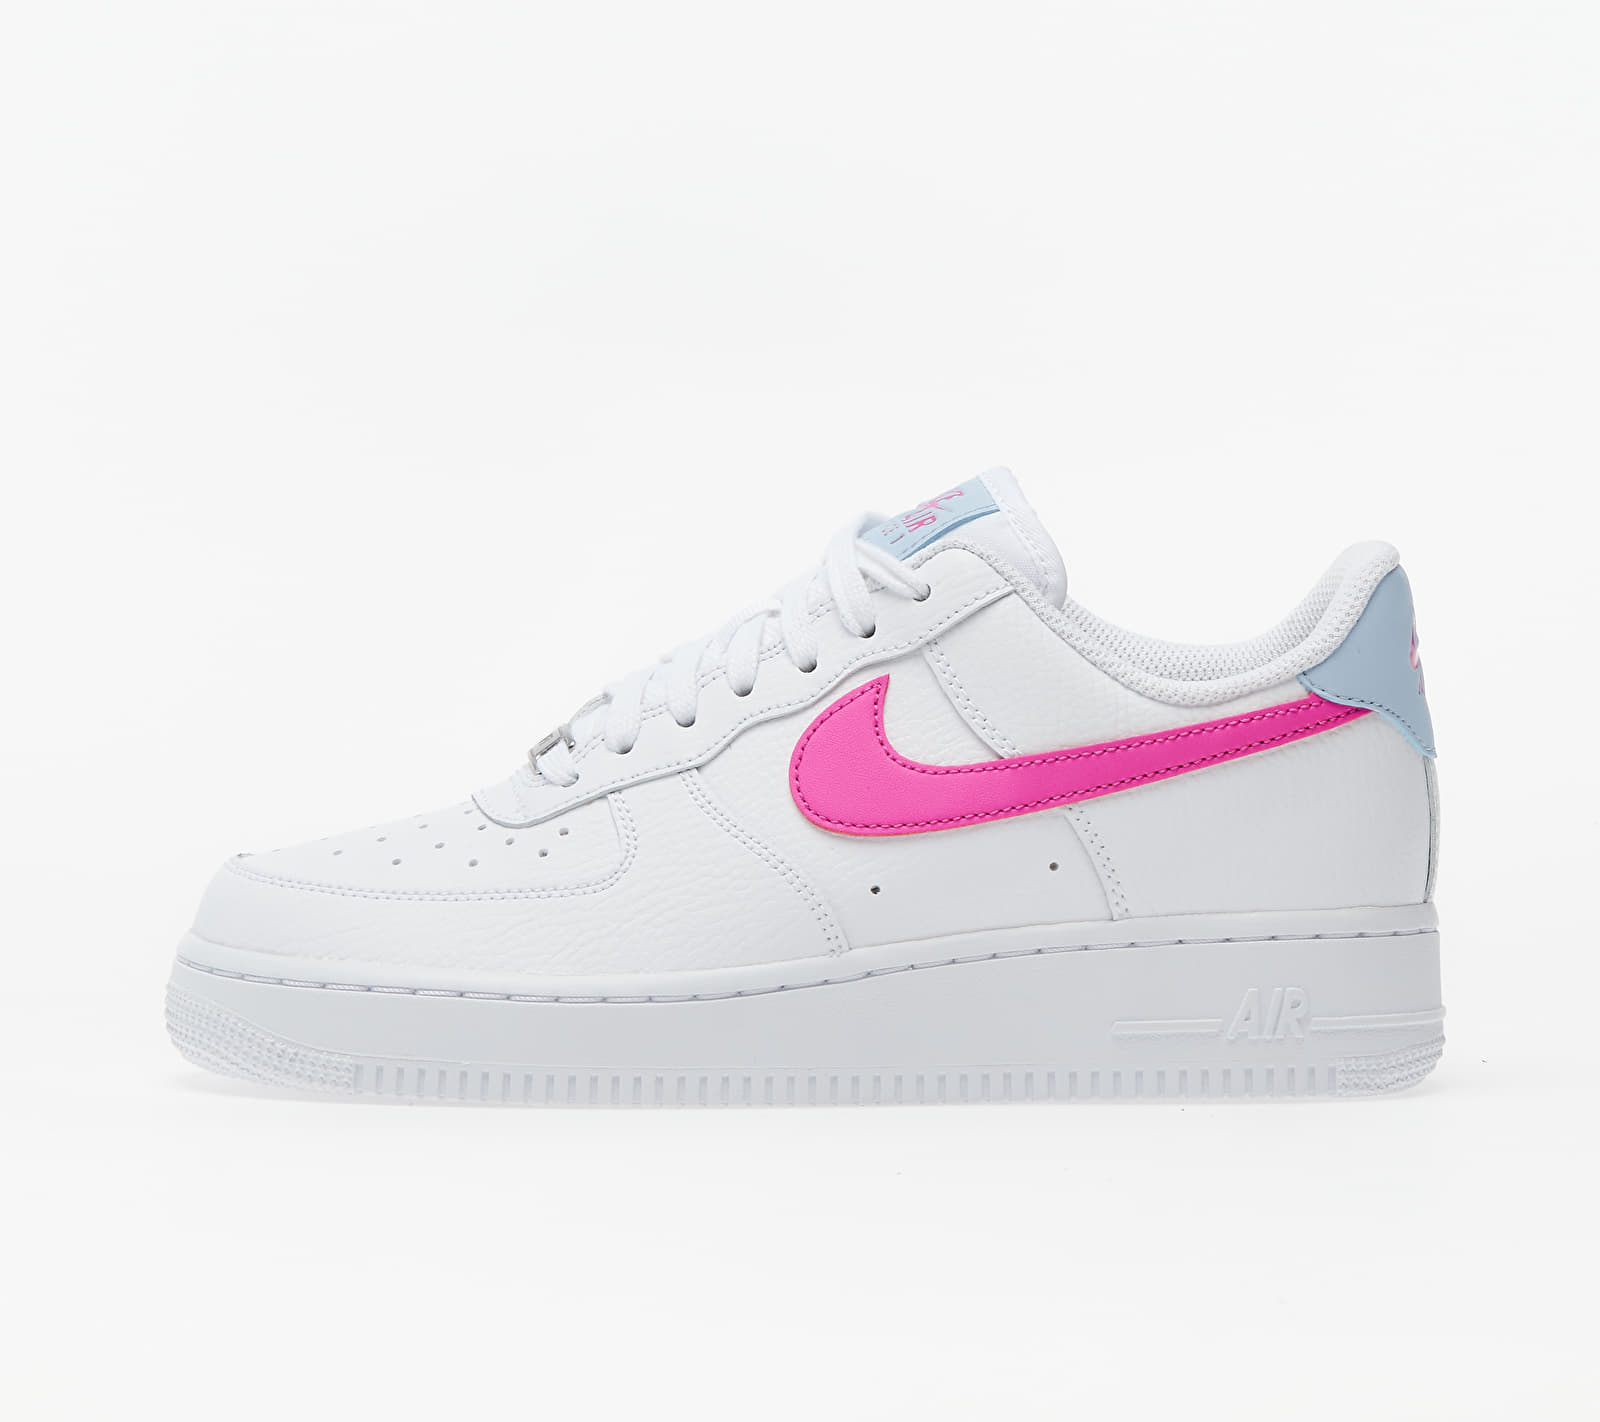 Nike Wmns Air Force 1 '07 White/ Fire Pink-Hydrogen Blue CT4328-101